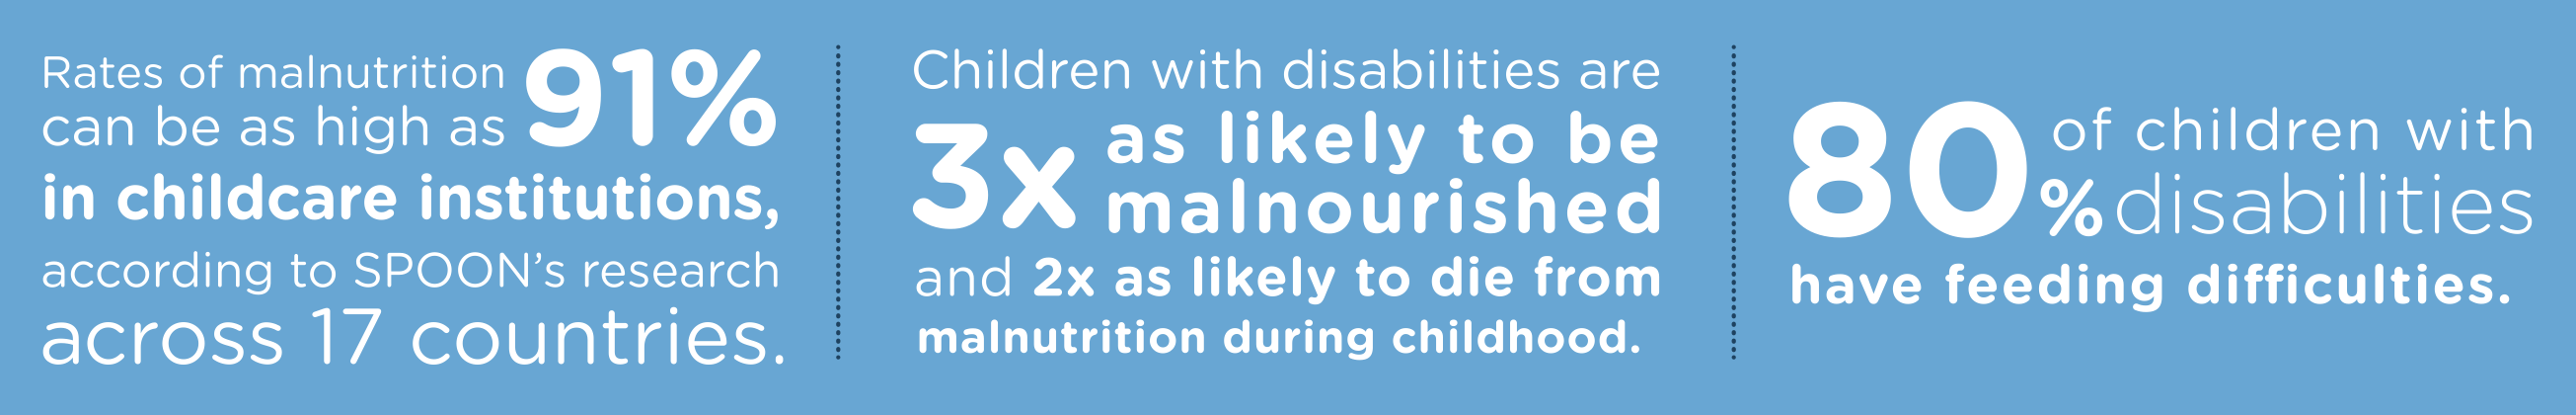 Graphic: rates of malnutrition can be as high as 91% in childcare institutions, according to SPOON's research across 17 countries. Children with disabilities are 3 times as likely to be malnourished and 2 times as likely to die from malnutrition during childhood. 80% of children with disabilities have feeding difficulties